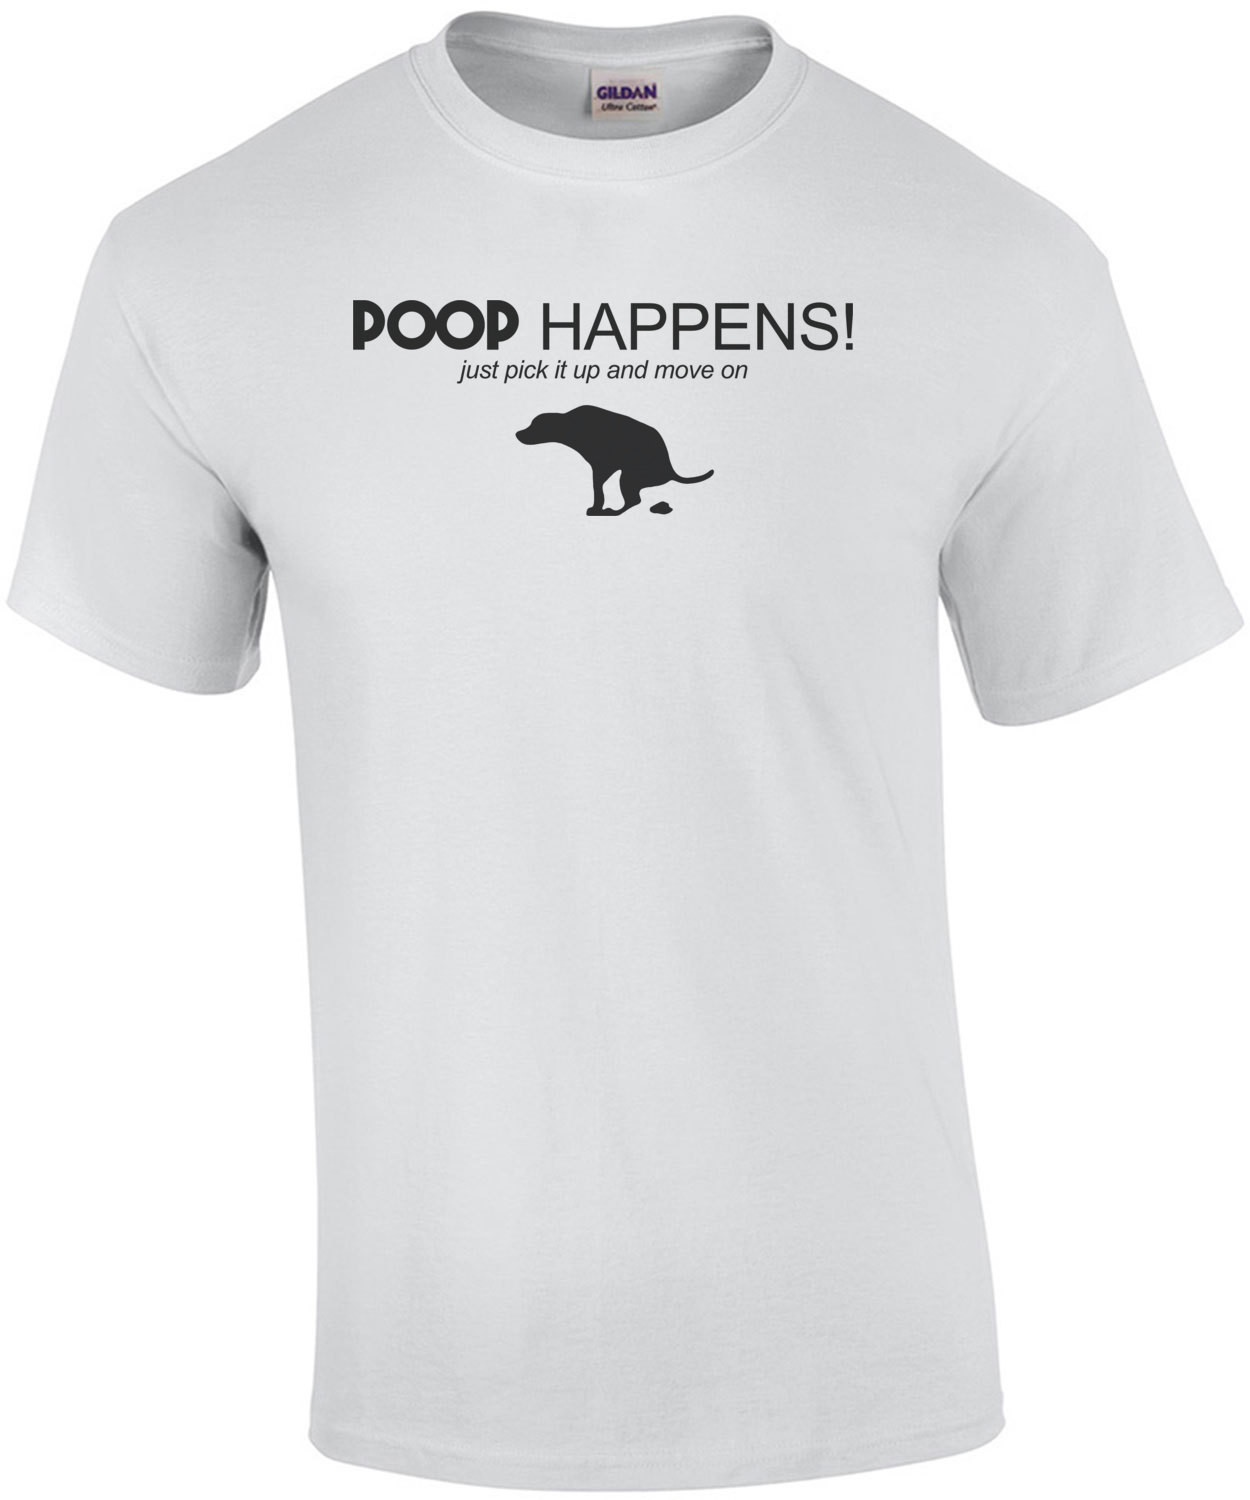 Poop happens! just pick it up and move on - dog t-shirt